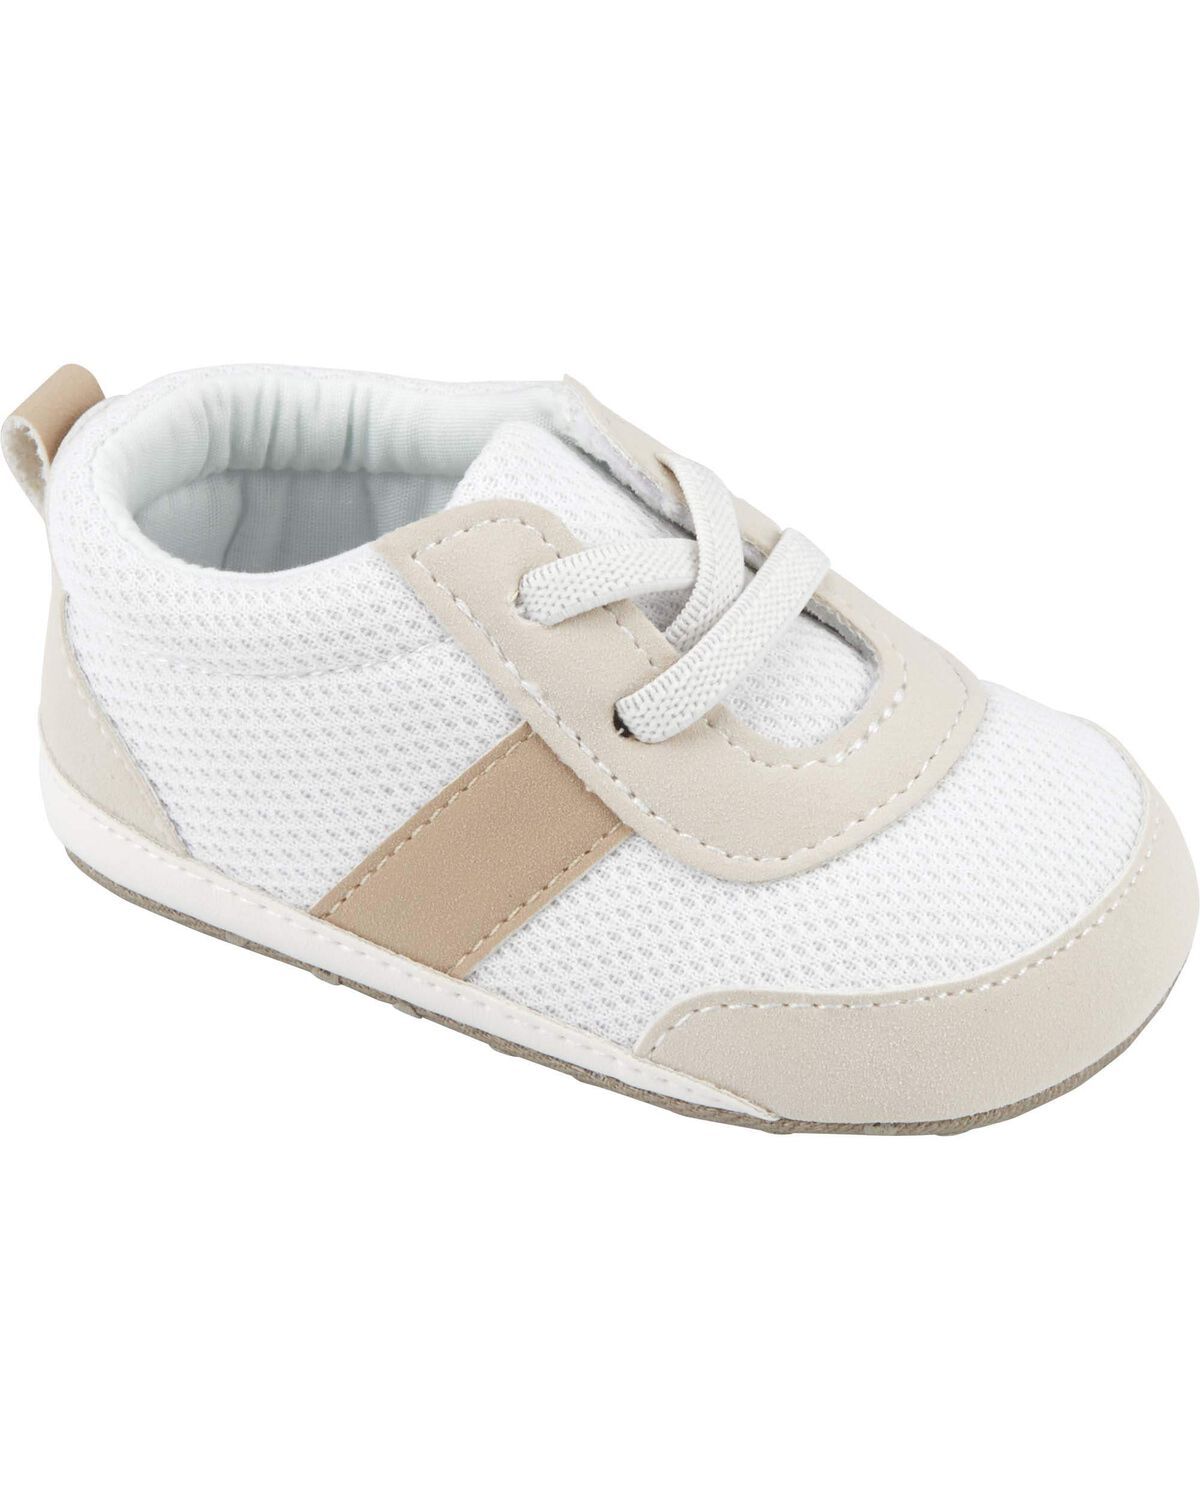 Tan/White Baby Sneaker Shoes | carters.com | Carter's